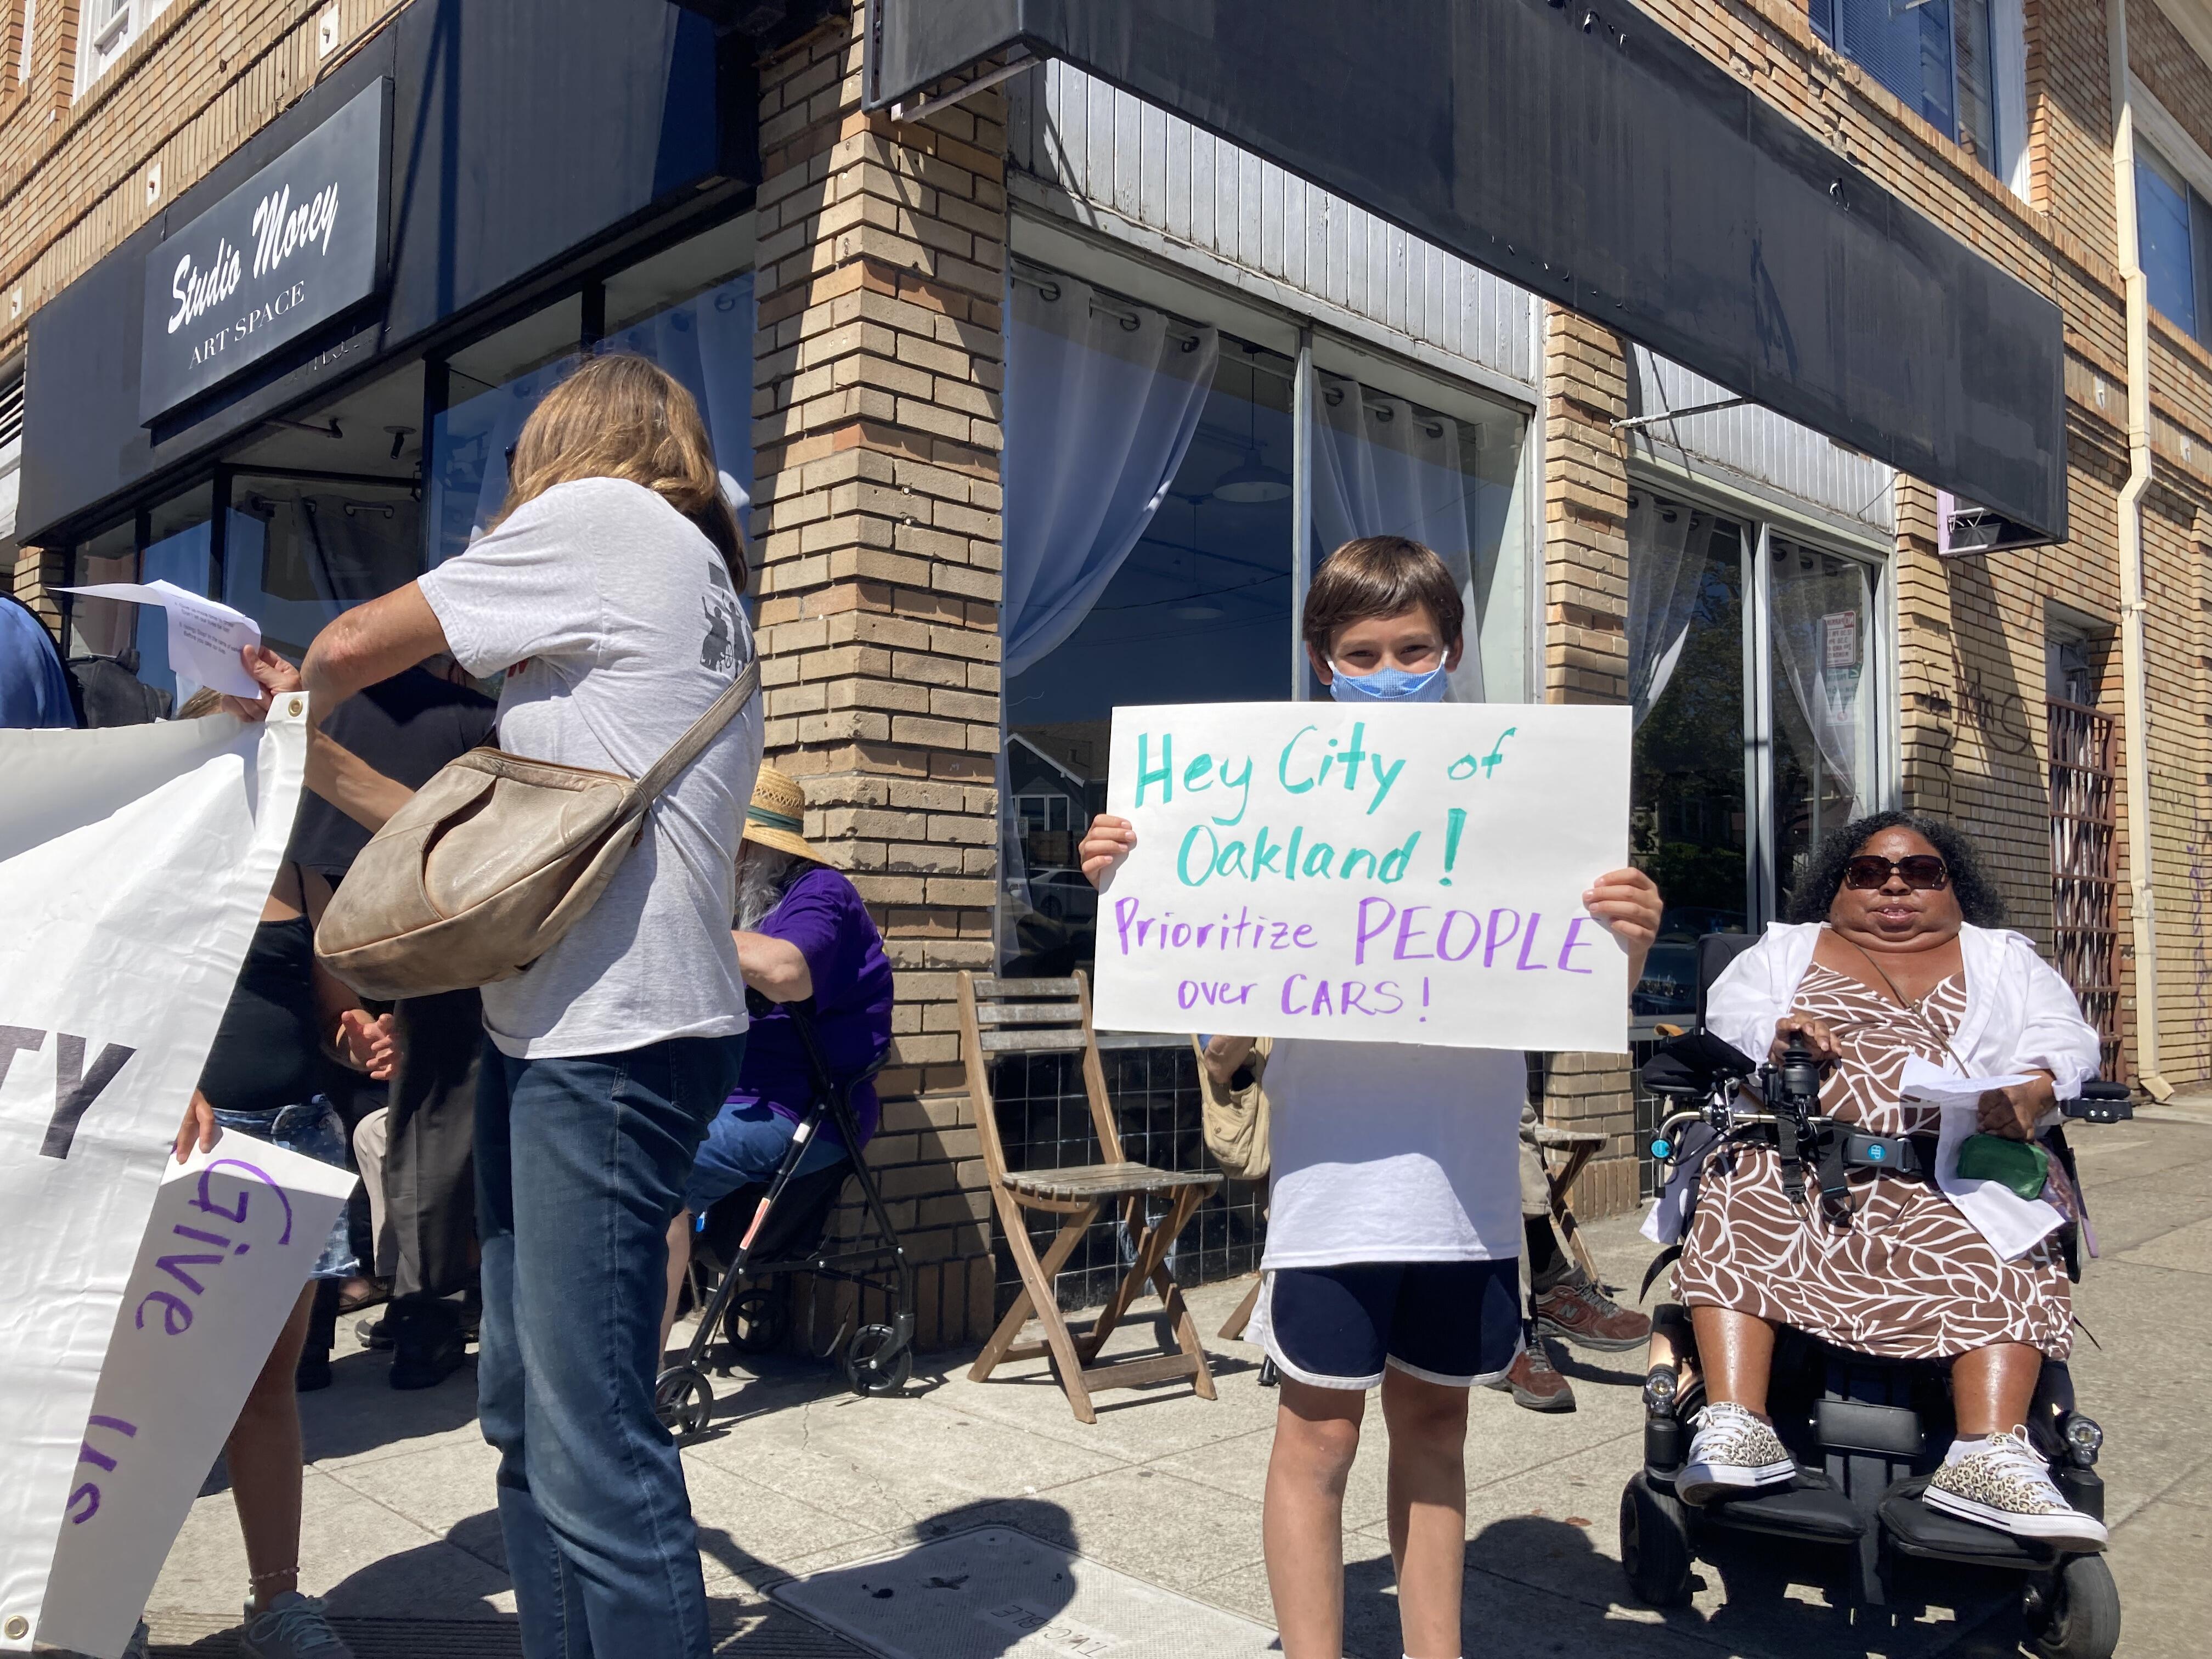 A child holds a poster that reads "Hey City of Oakland! Prioritize people over cars!" They have short brown hair, a blue mask, white shirt, and blue shorts.